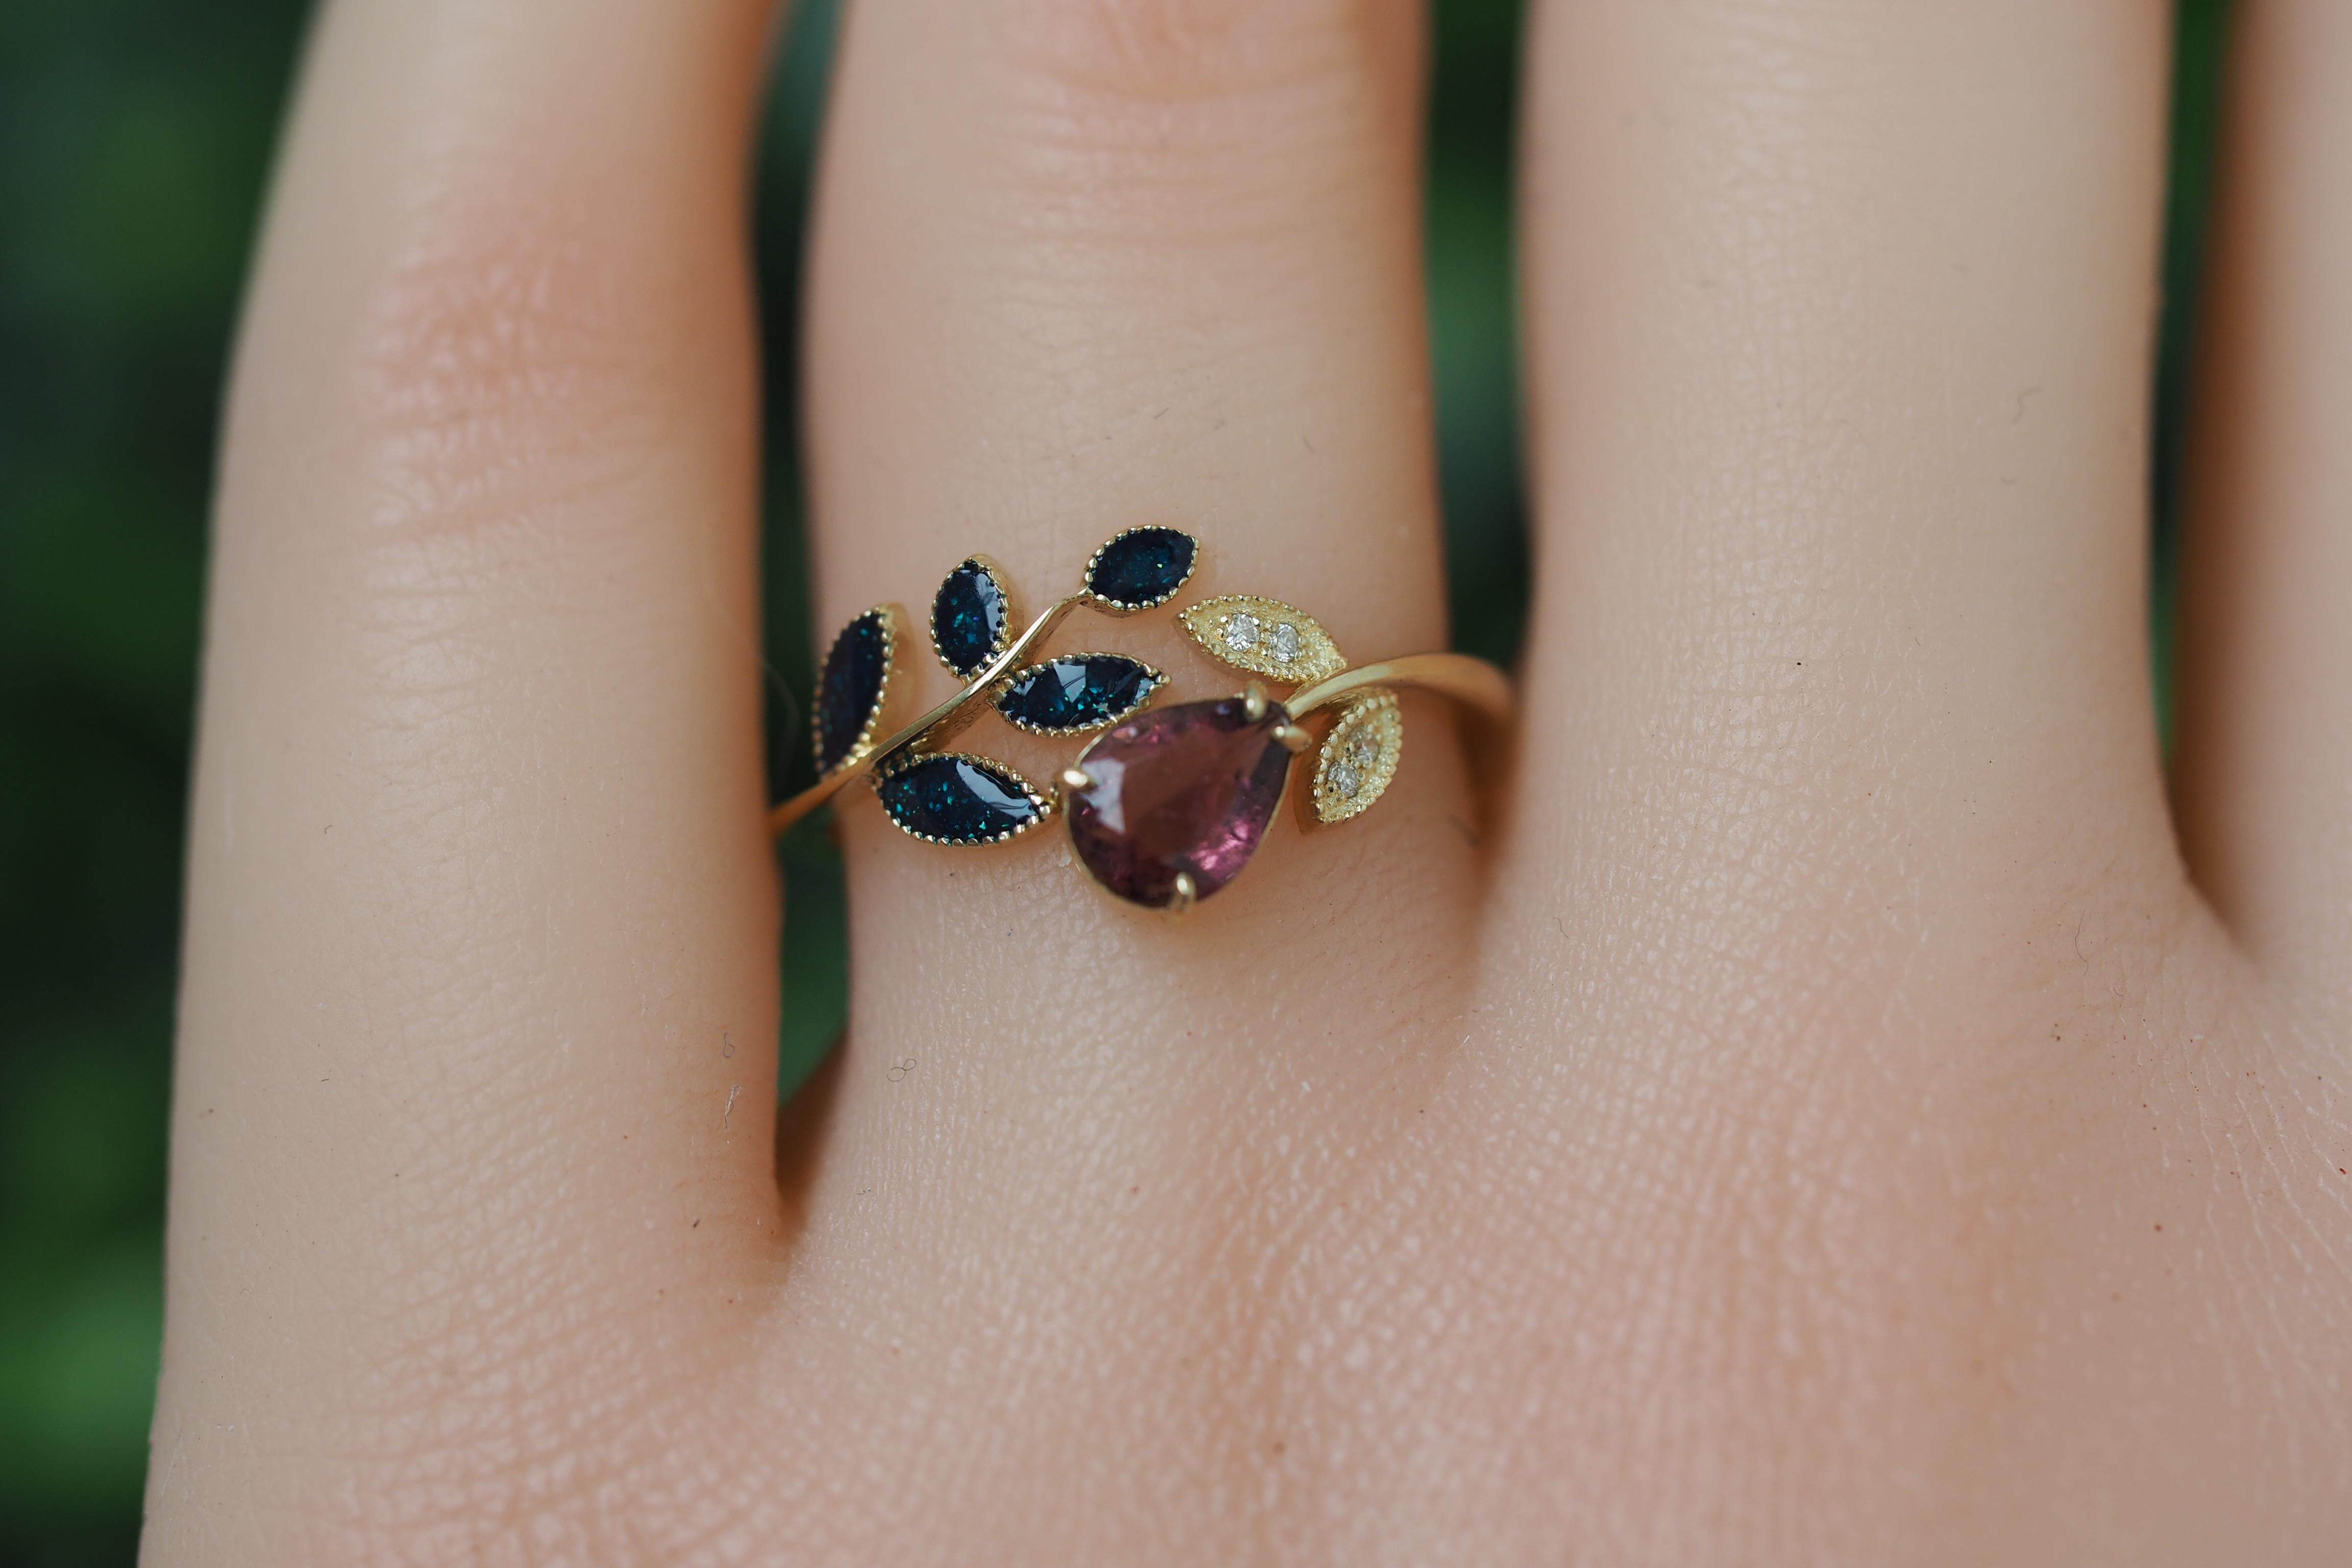 For Sale:  Pink Tourmaline Ring in 14k Gold, Tourmaline Gold Ring 9